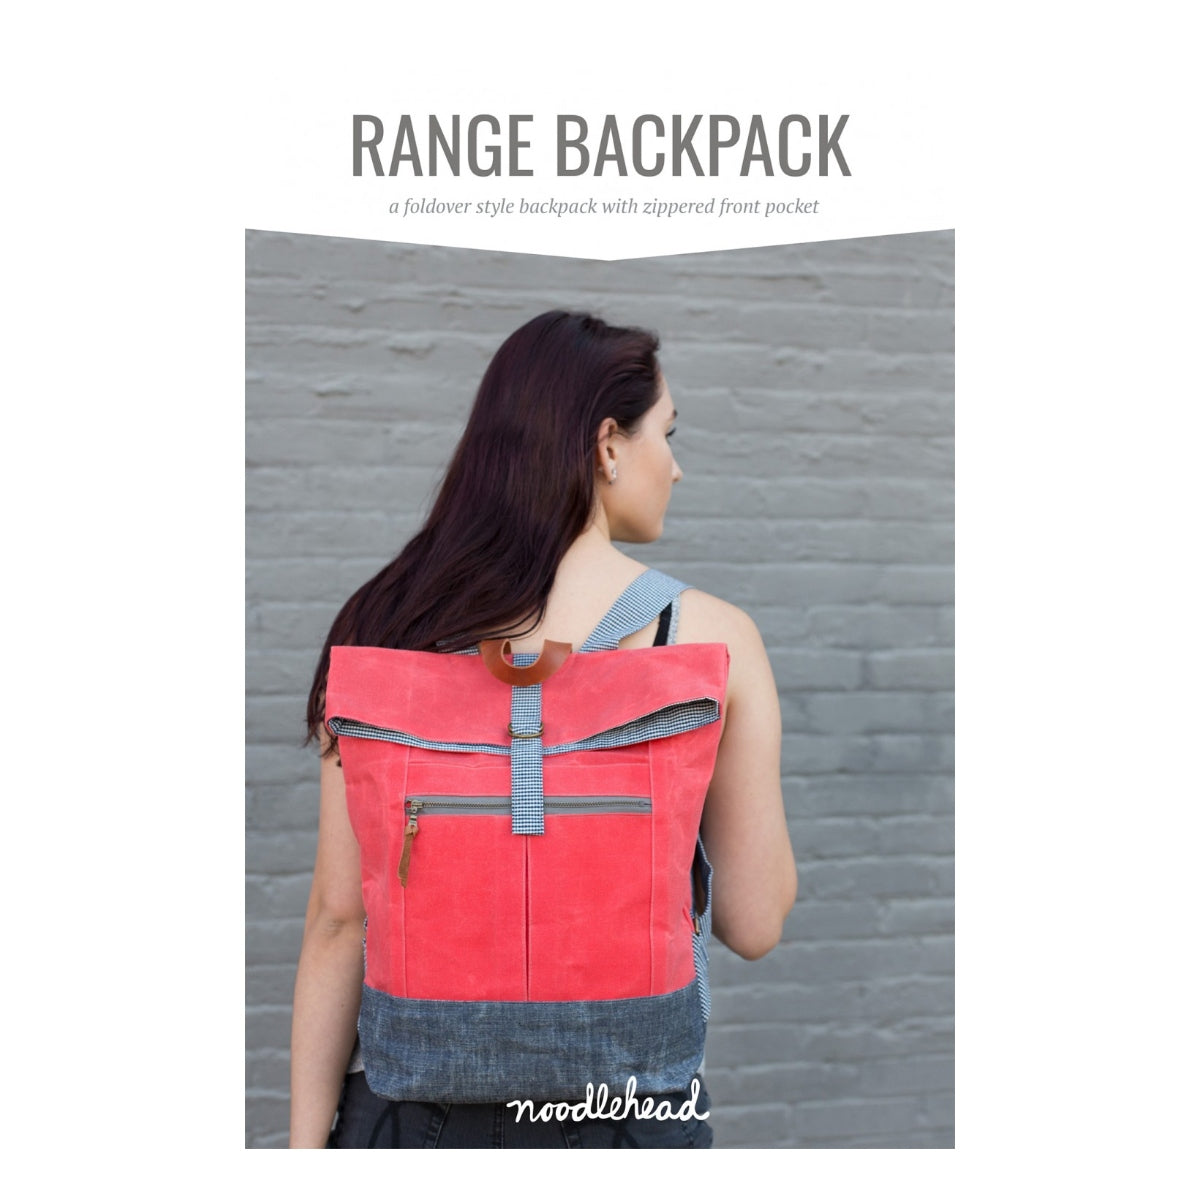 Range Backpack.  A useful and fun backpack to make! It’s great for any outing where you need to be hands free! The foldover top and closure keep things secure, while the front zippered pocket keeps essentials within easy reach. Adjustable straps make it wearable in any season  Finished Dimensions: 15in tall (closed), 10-1/2in wide x 4in deep (at base)